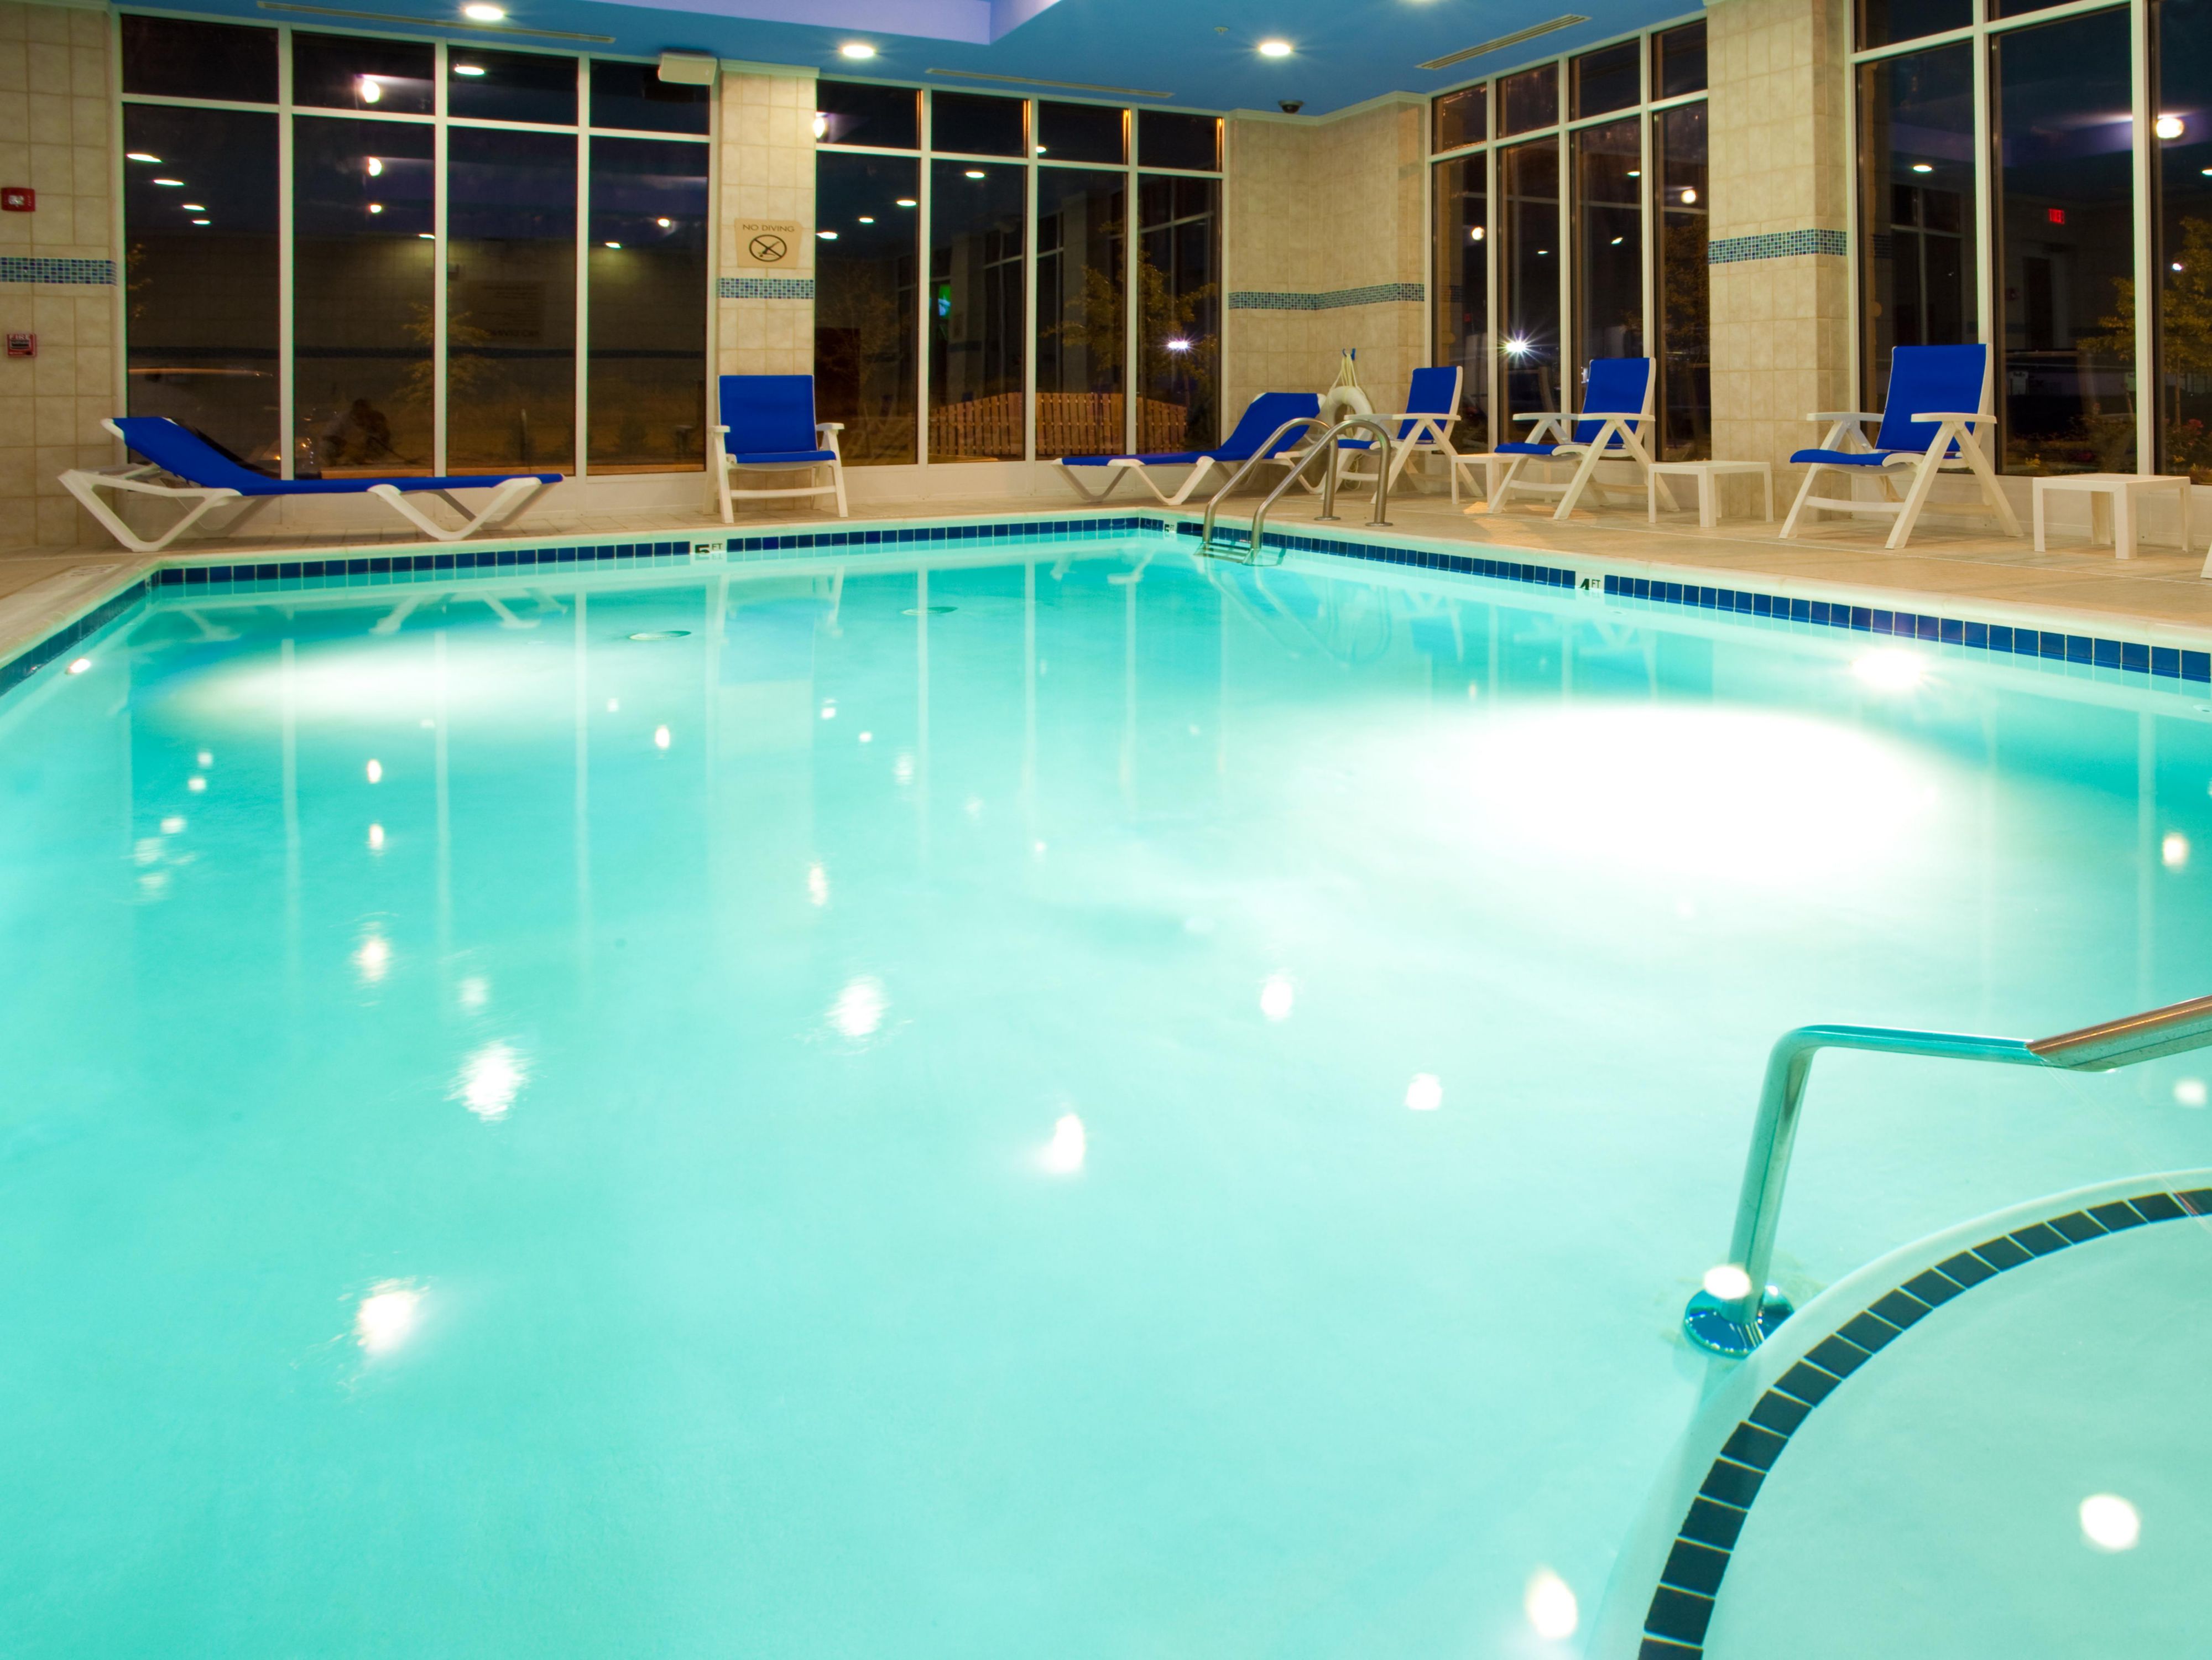 Our heated pool is open year-round! Bring the kids - and don't forget your swimsuits!